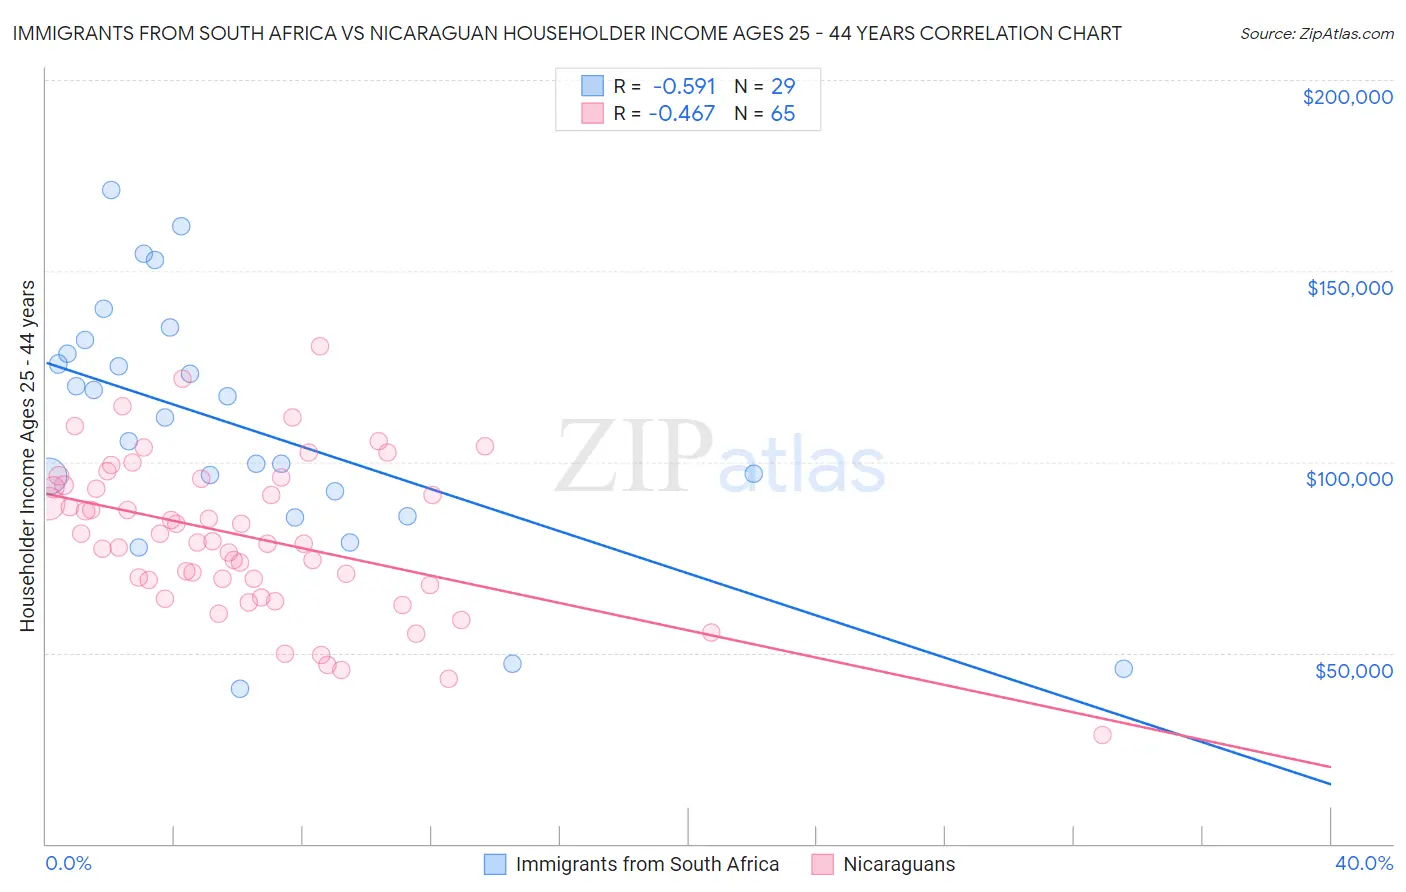 Immigrants from South Africa vs Nicaraguan Householder Income Ages 25 - 44 years